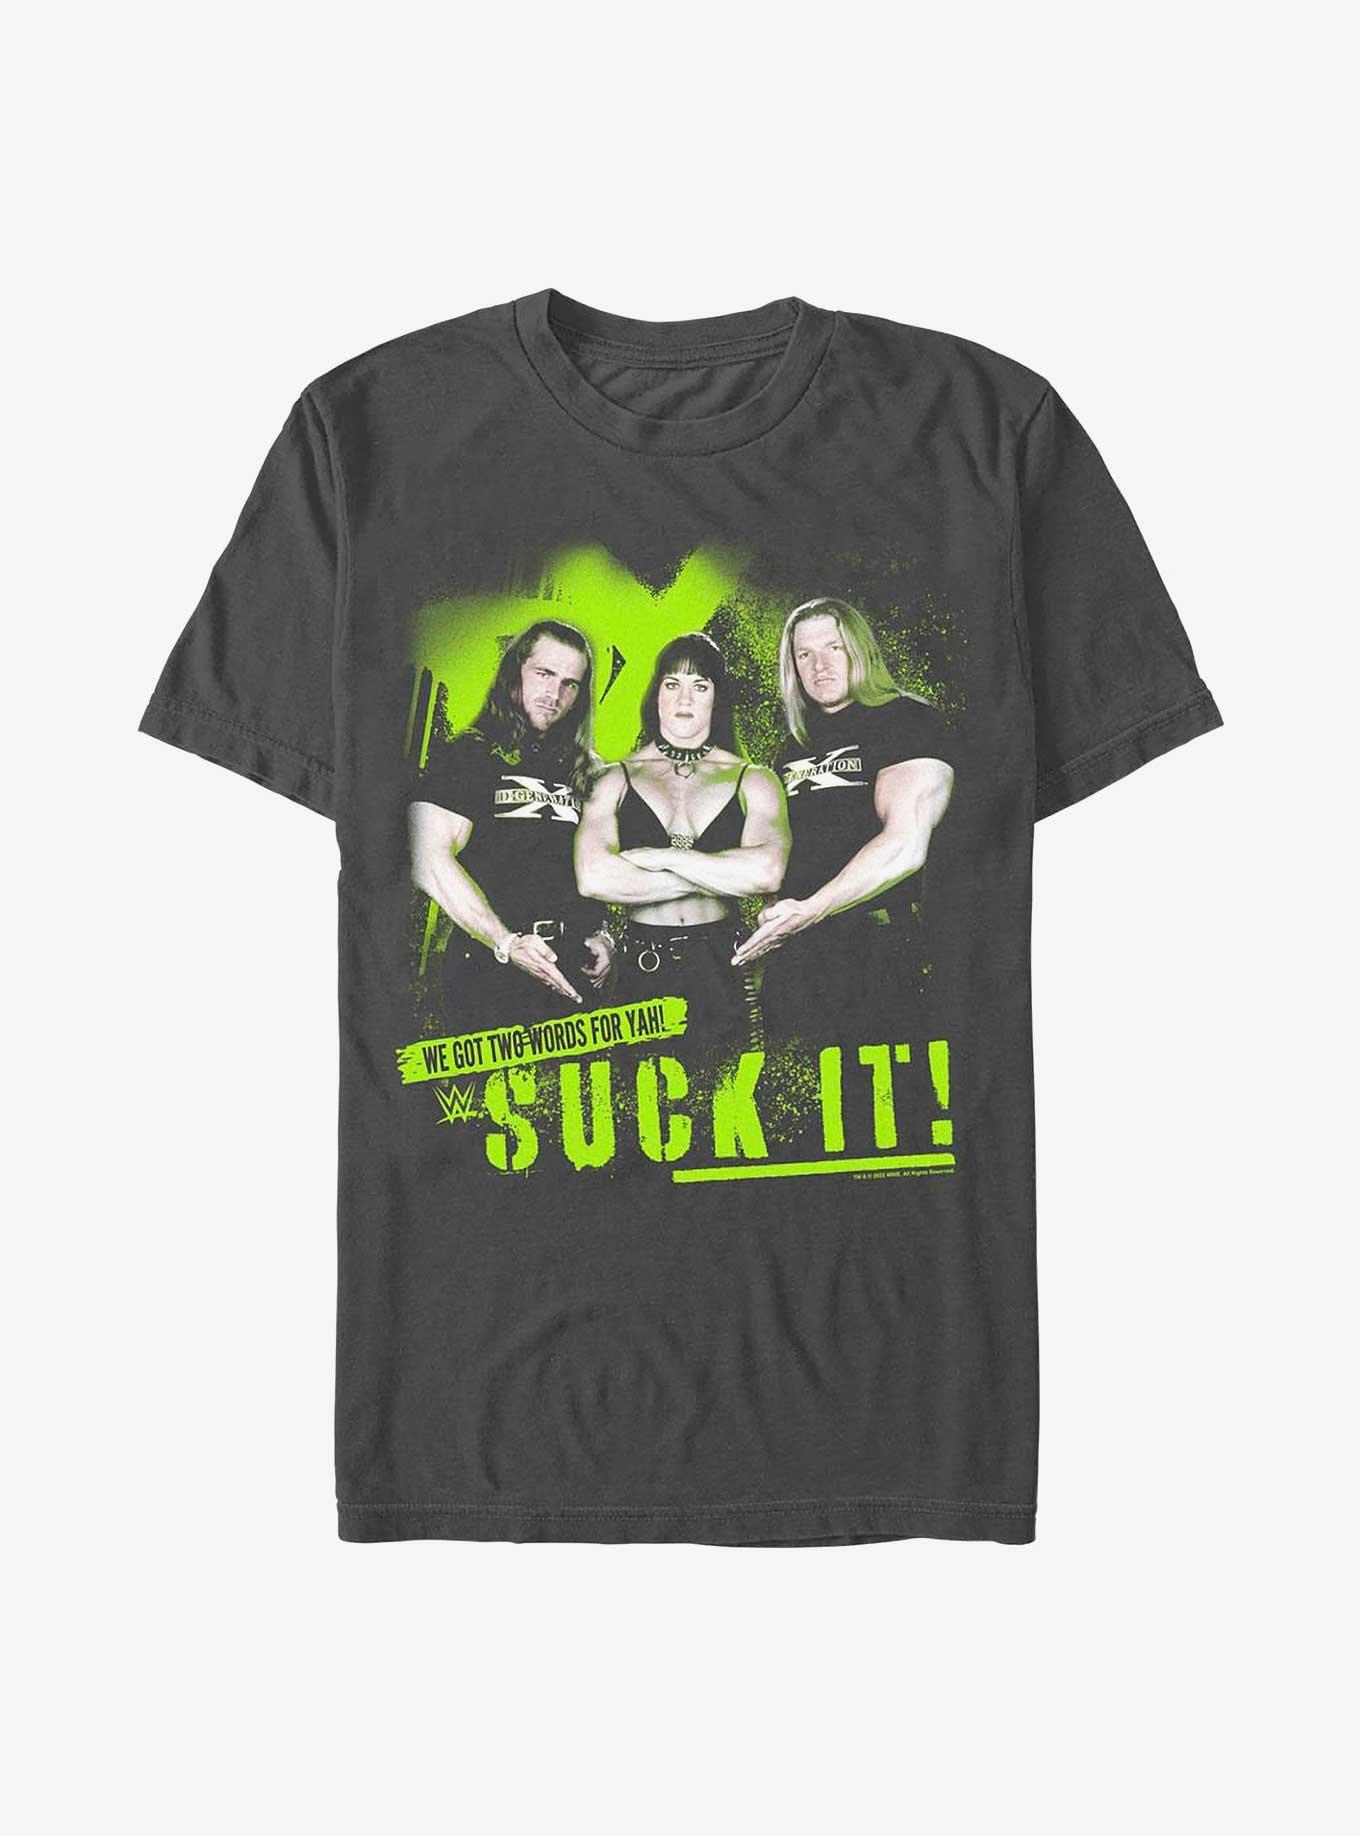 WWE D-Generation X Two Words For Yah! T-Shirt